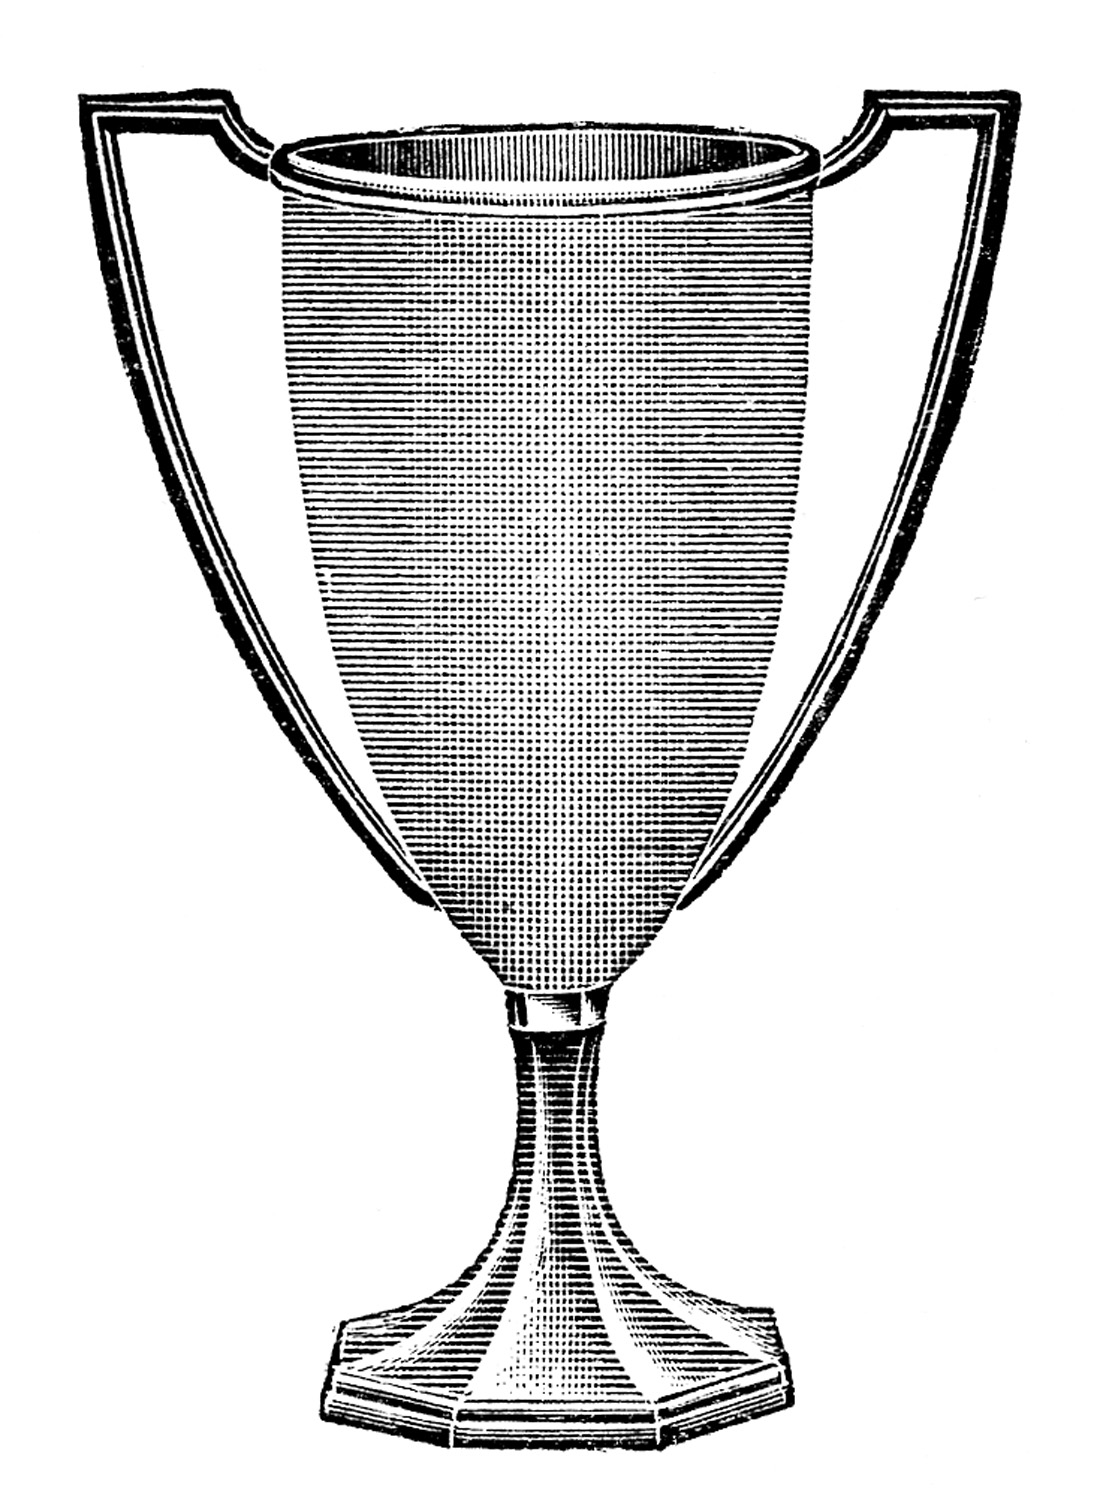 Cup trophy clipart